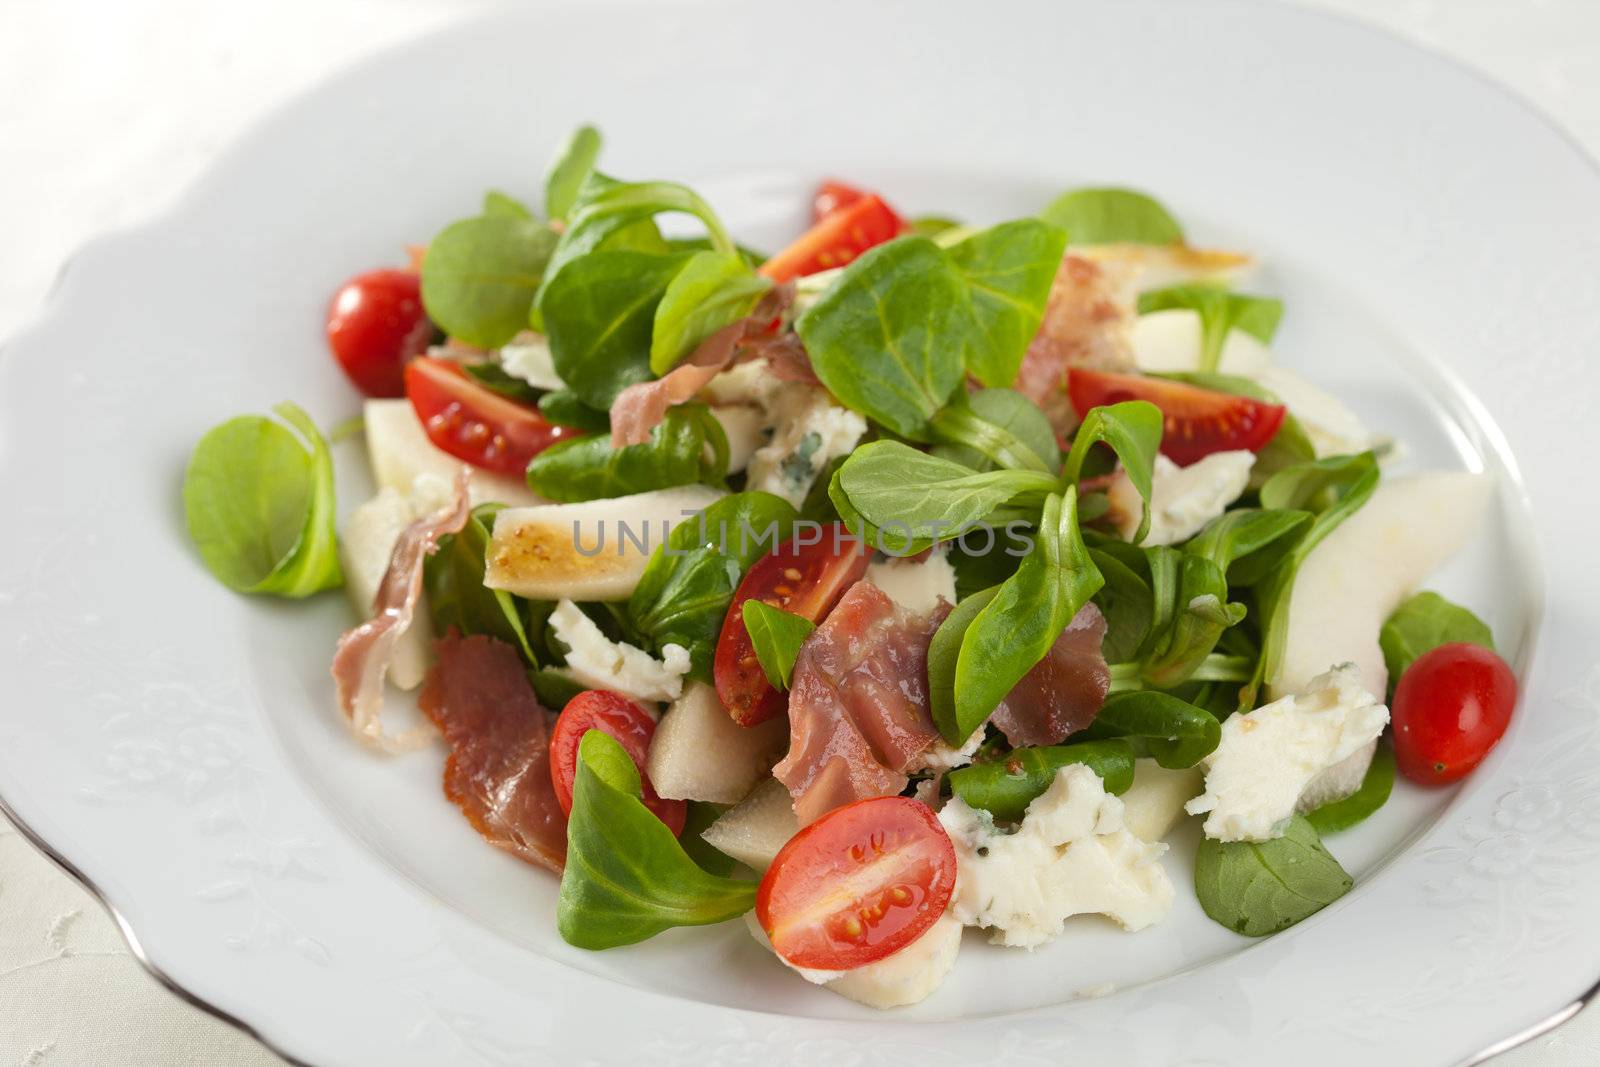 Delicious salad with fresh greens, tomatoes, roquefort and pear